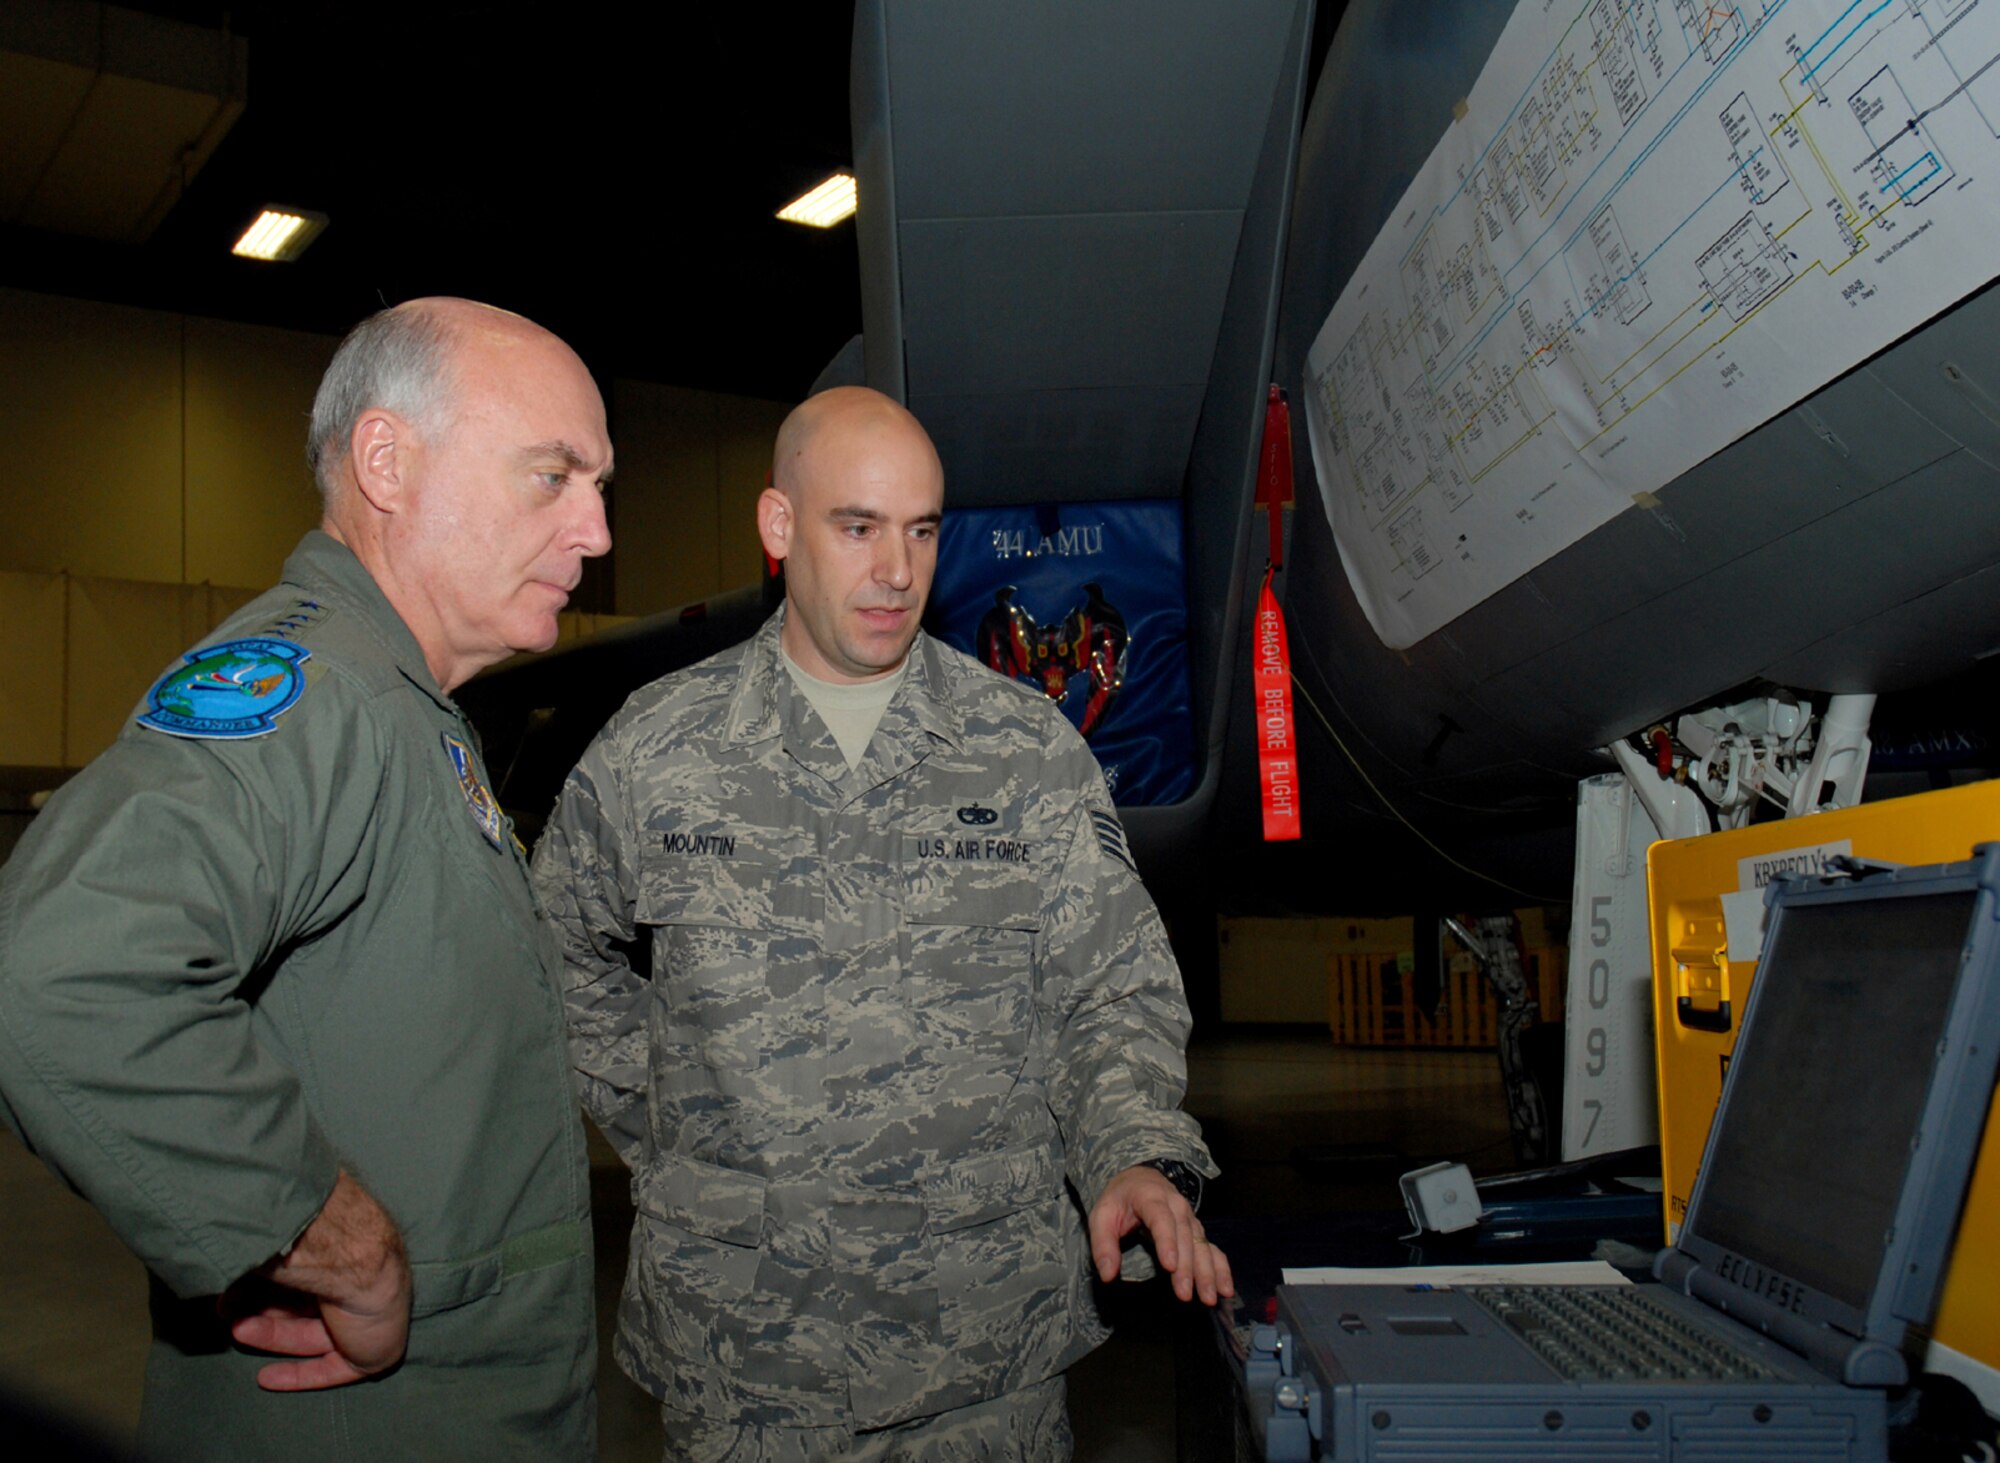 Gen. Carrol "Howie" Chandler, Pacific Air Forces commander, gets a briefing on a wire analyzer from Staff Sgt. Ronald Mountin, NCO in charge of the 18th Wing Wire Analysis Team. The equipment allows maintainers to check multiple circuit connections and components on aircraft in a matter of seconds. (U.S. Air Force photo/Airman 1st Class Ryan Ivacic)